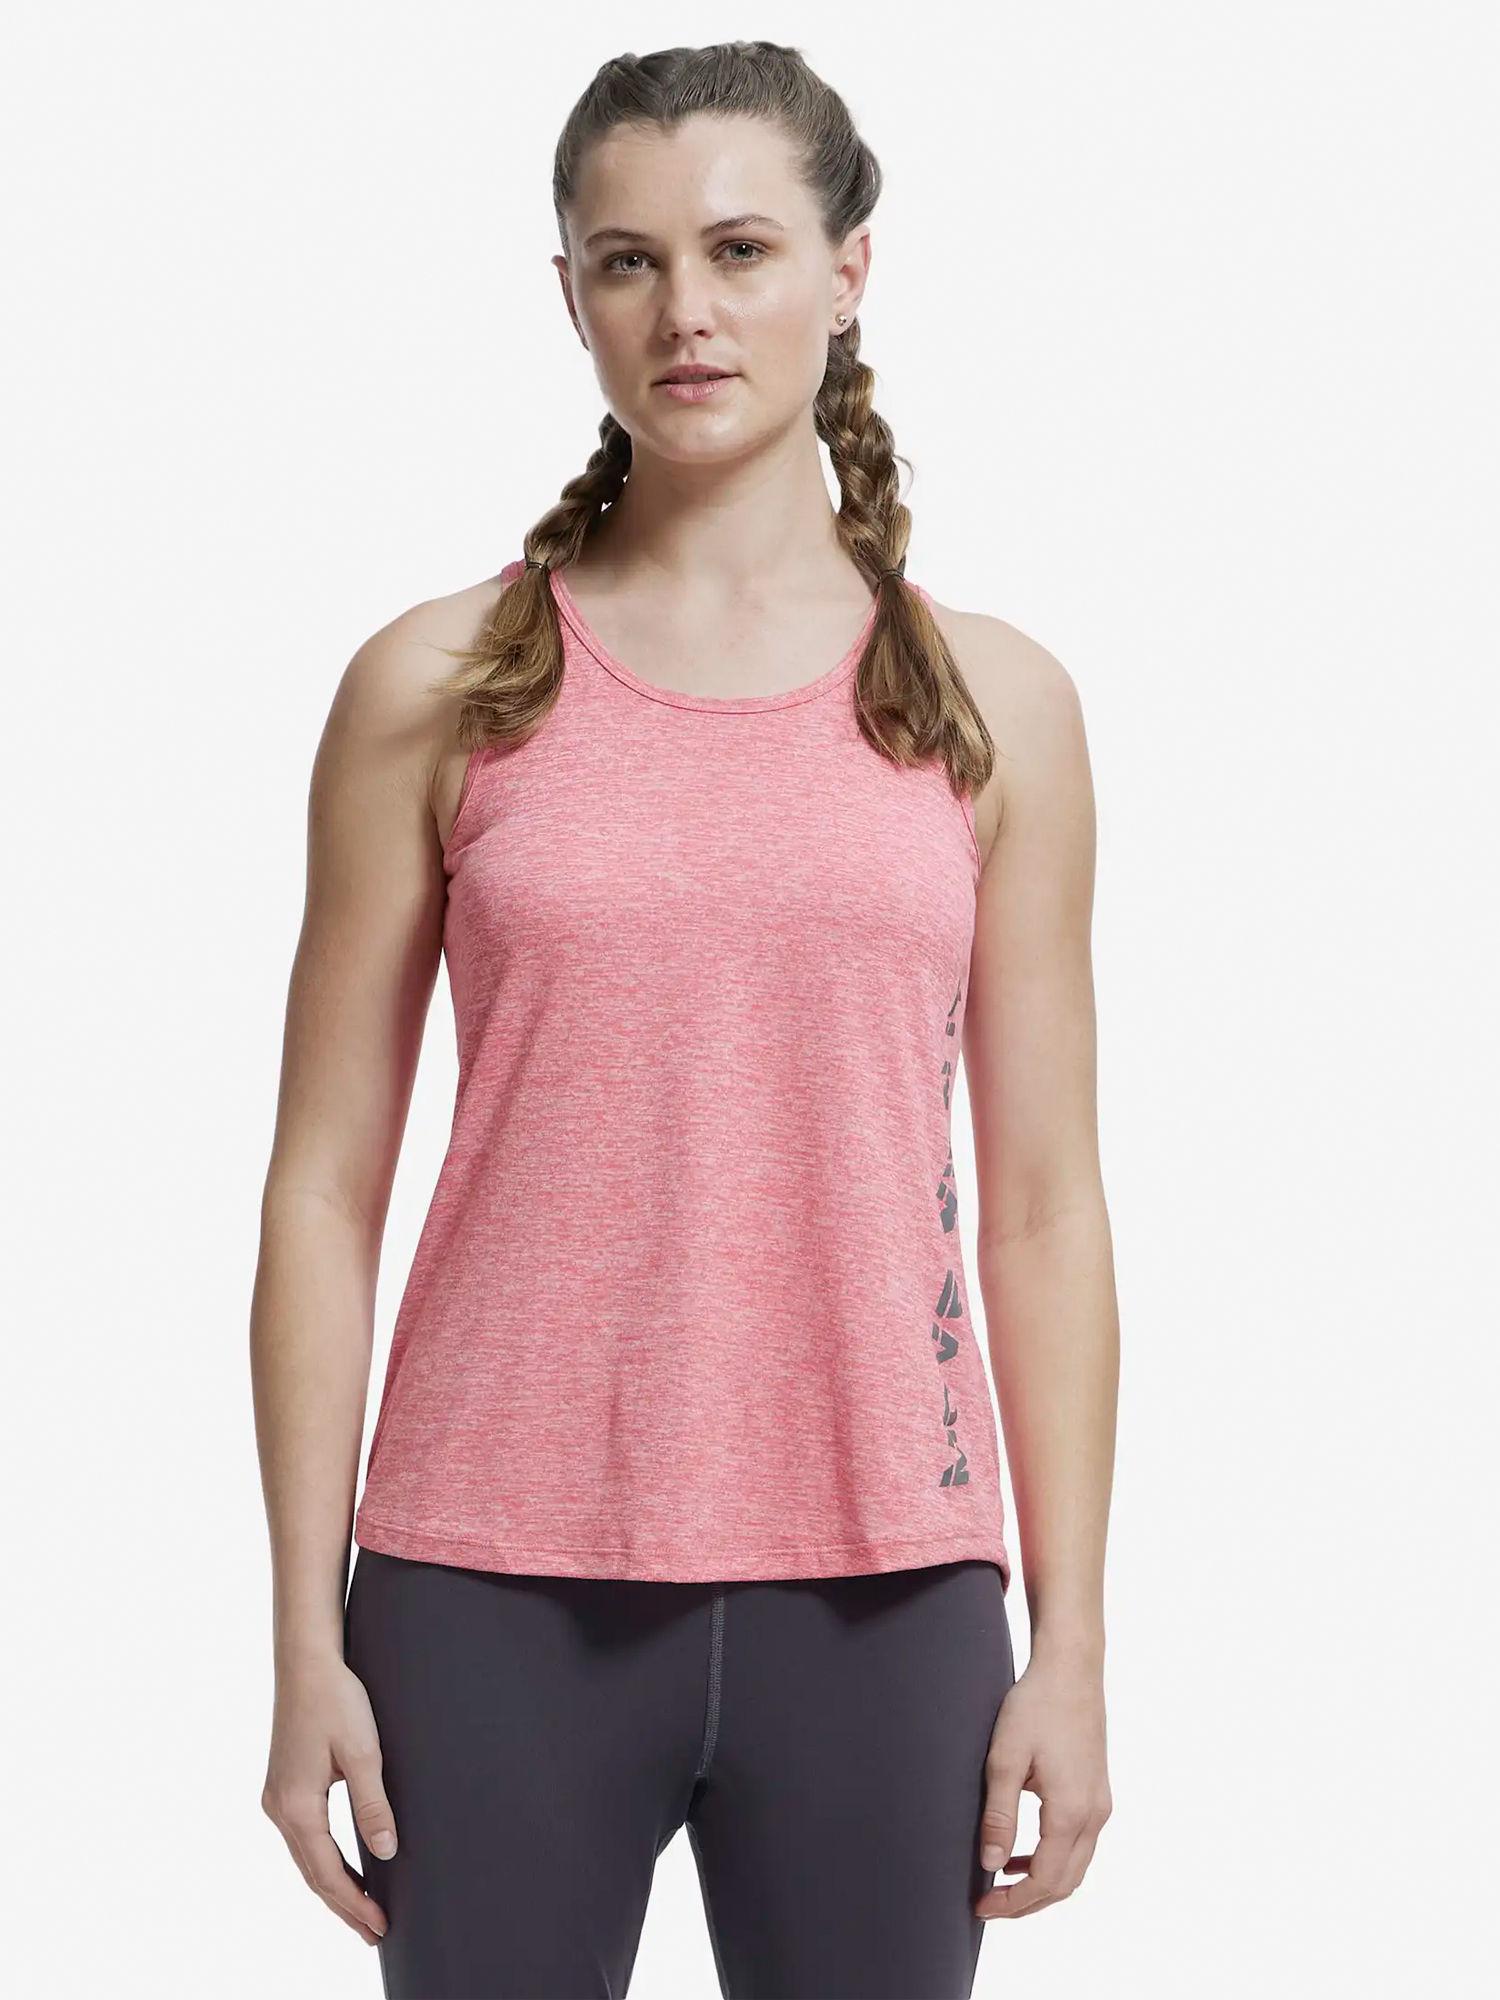 mw33 women's microfiber performance tank top with stay dry treatment coral